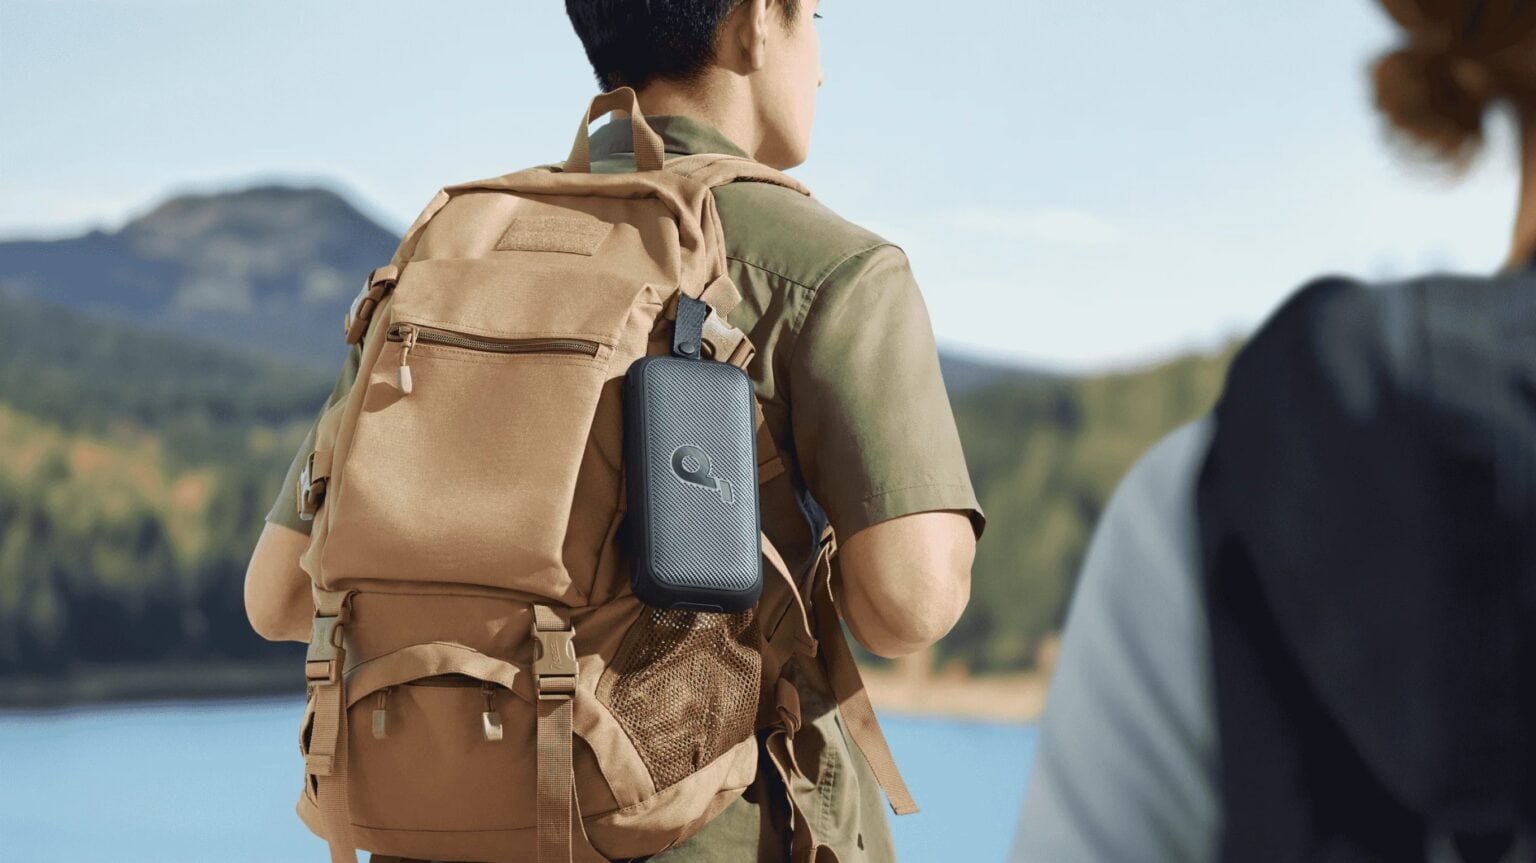 The new Soundcore Motion 300 is small enough to strap to a backpack for a hike.